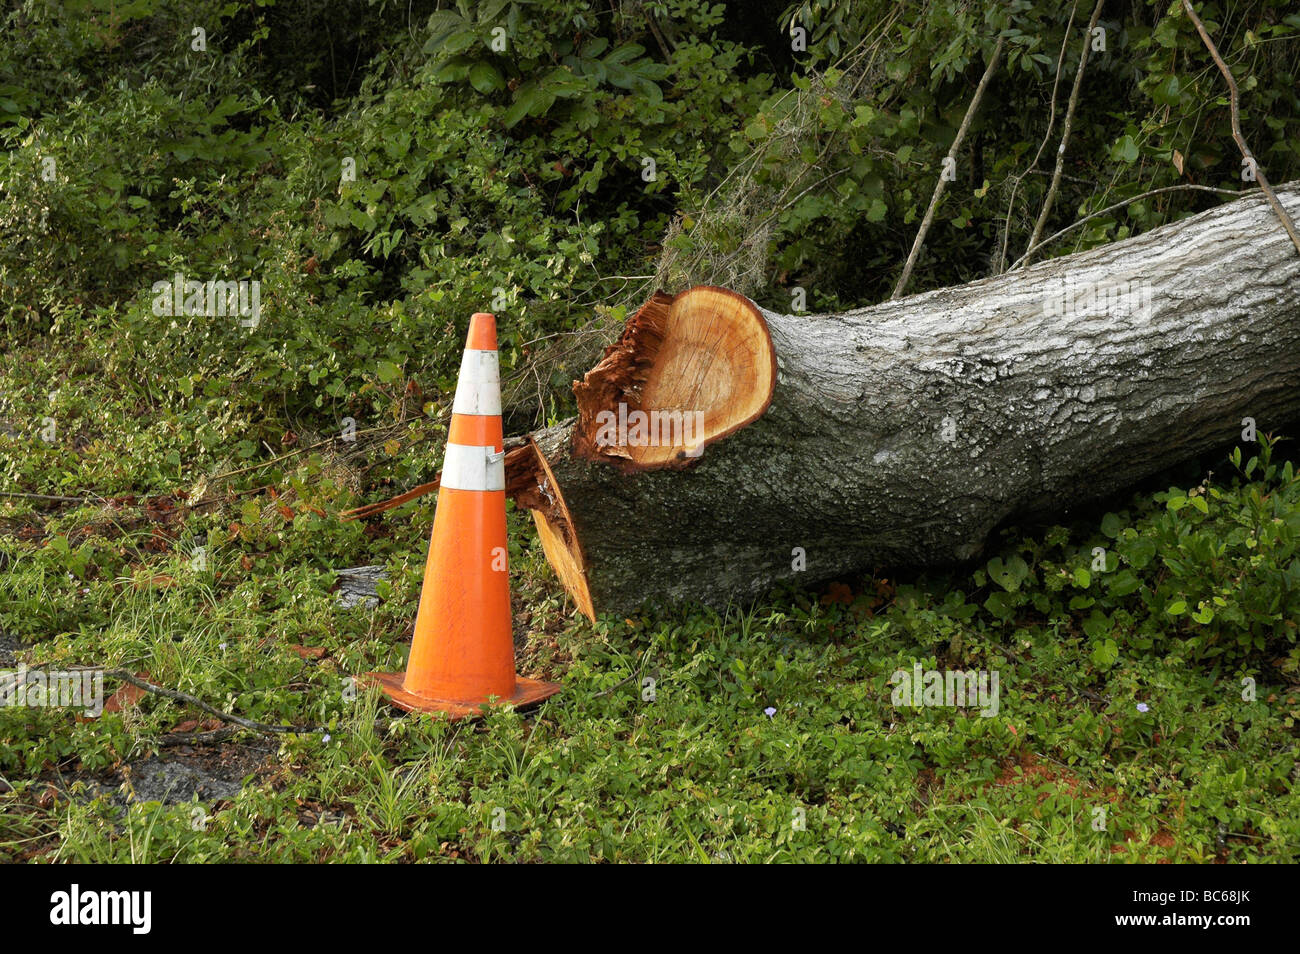 safety cone is placed next to fallen tree, North Florida Stock Photo